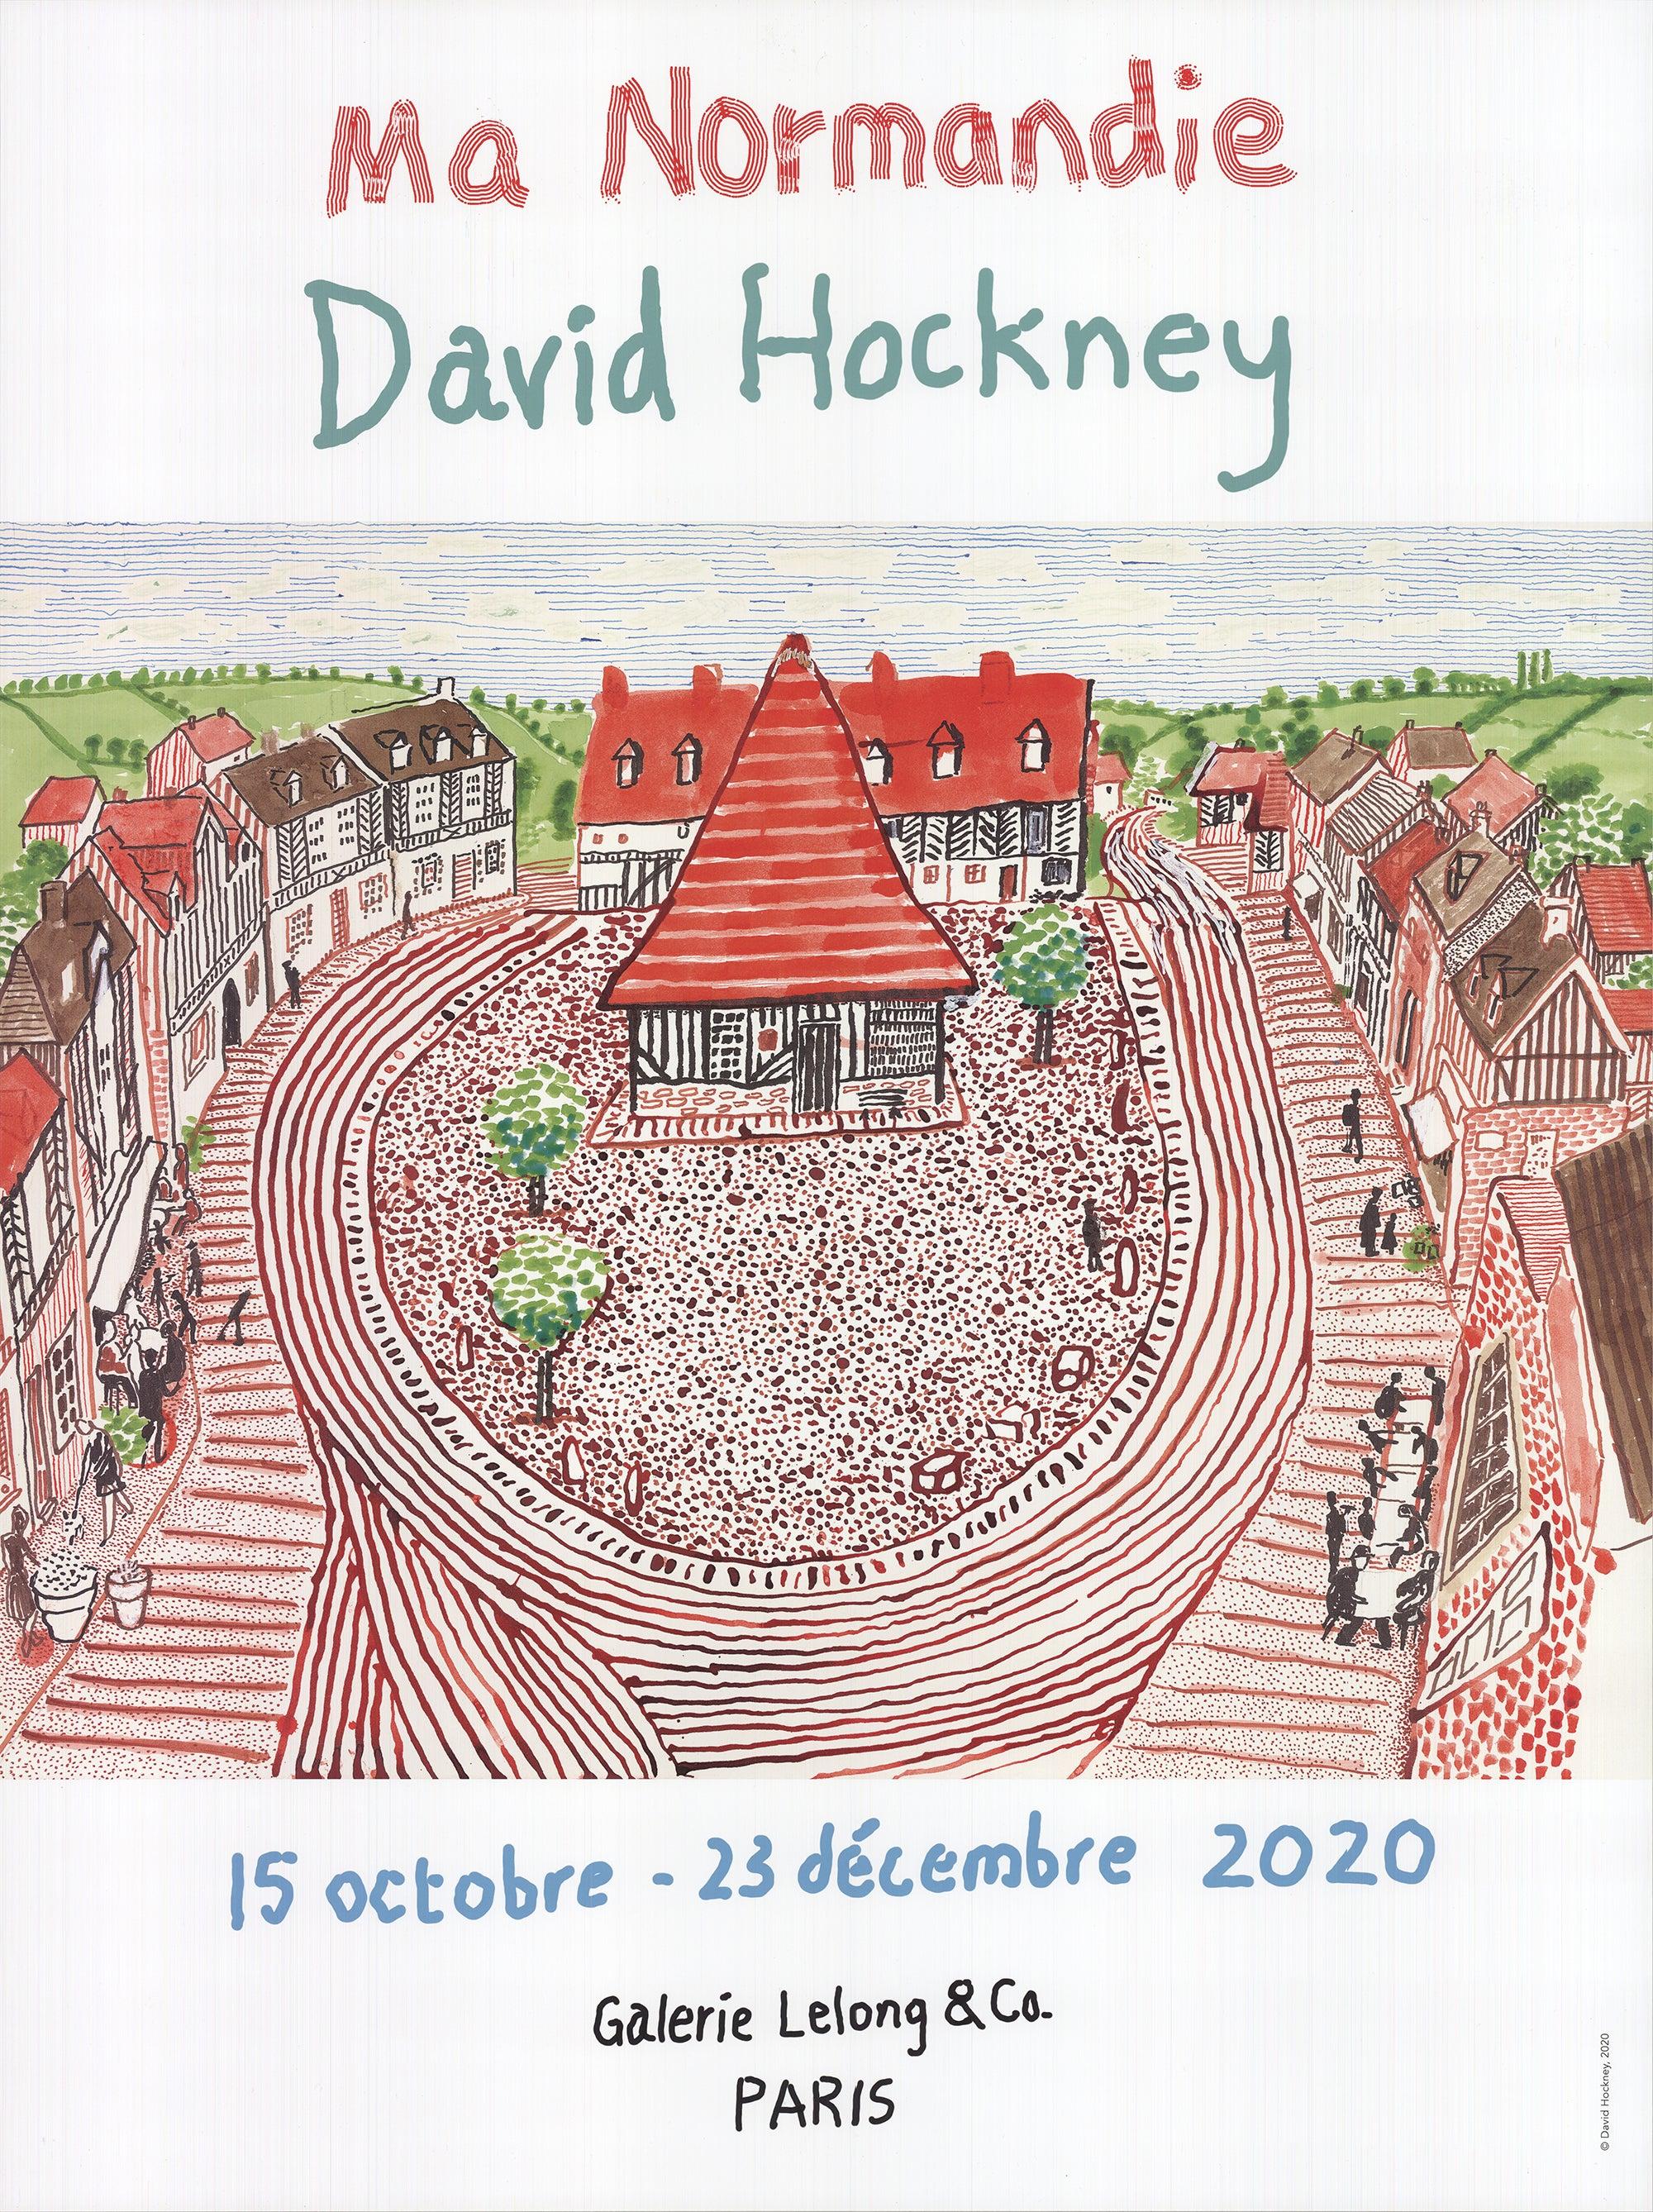 Paper Size: 31.5 x 23.5 inches ( 80.01 x 59.69 cm )
Image Size: 18 x 23.5 inches ( 45.72 x 59.69 cm )
Framed: No
Condition: A: Mint

Additional Details: Poster created for a Hockney show October- December 2020 at Galerie Lelong & Co,